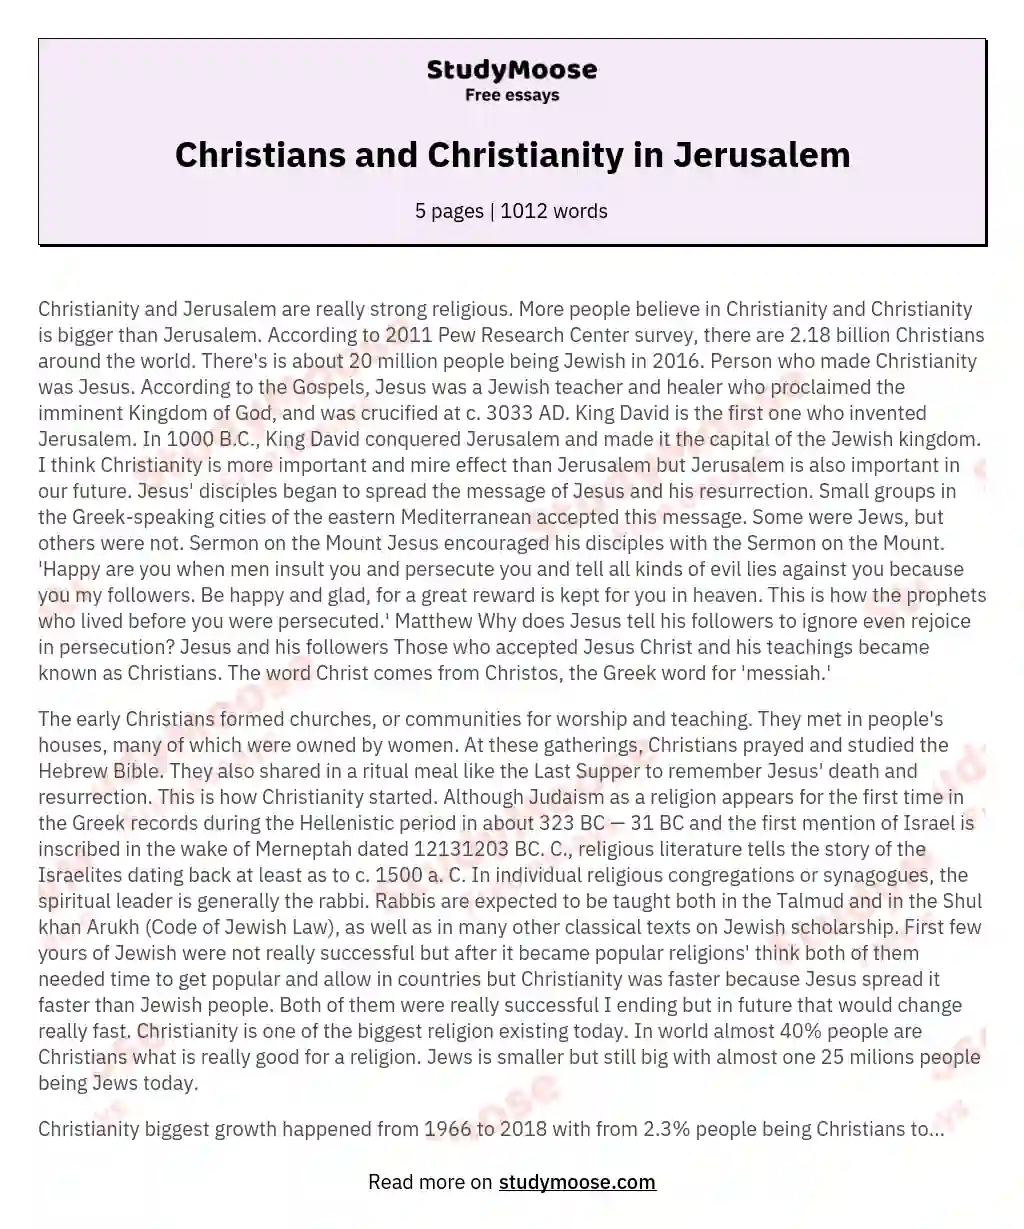 Christians and Christianity in Jerusalem